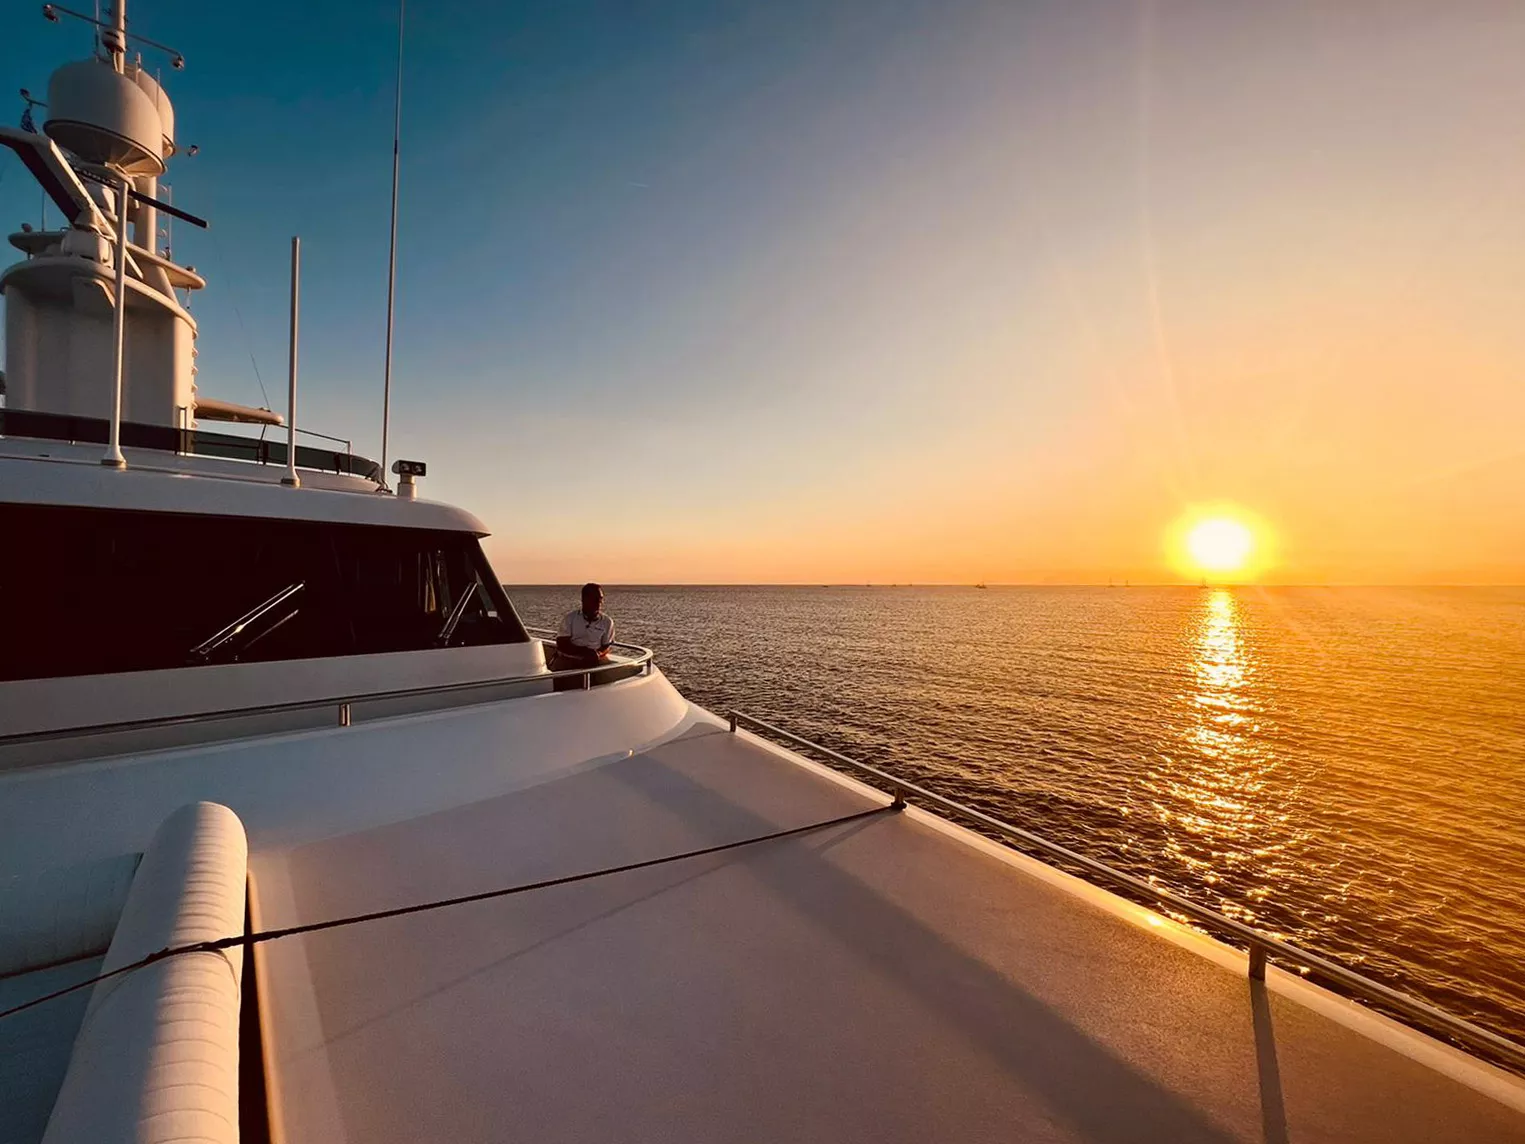 Photo of the sunset on the sea from a superyacht.